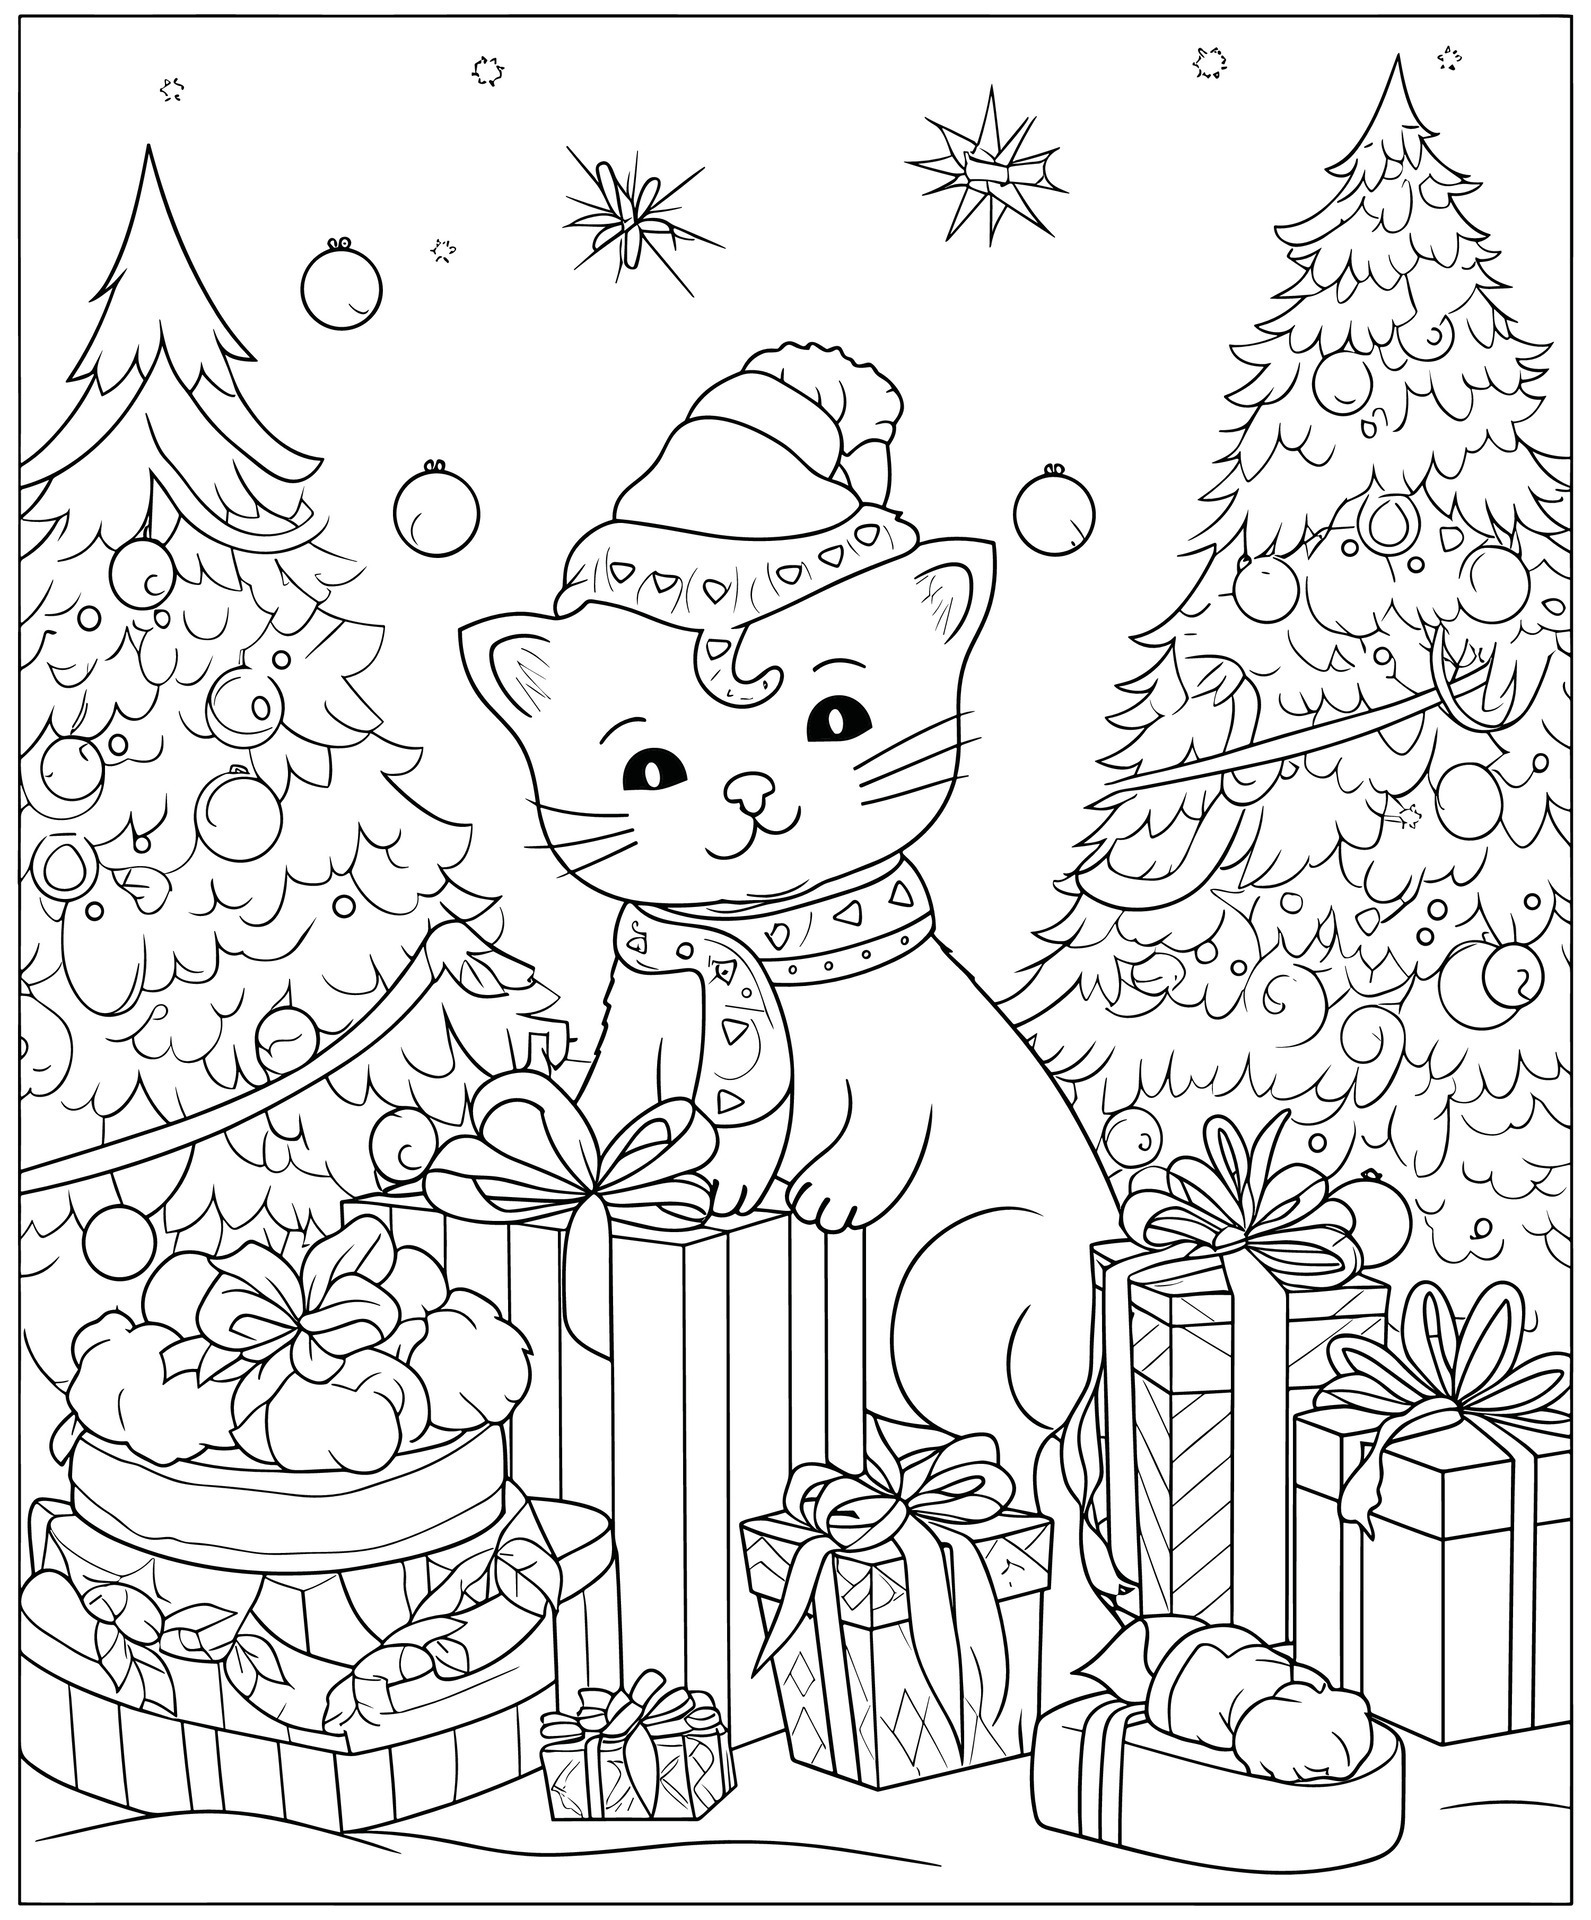 Christmas Cat Coloring Page Extravaganza: Purr-fect Holiday Fun